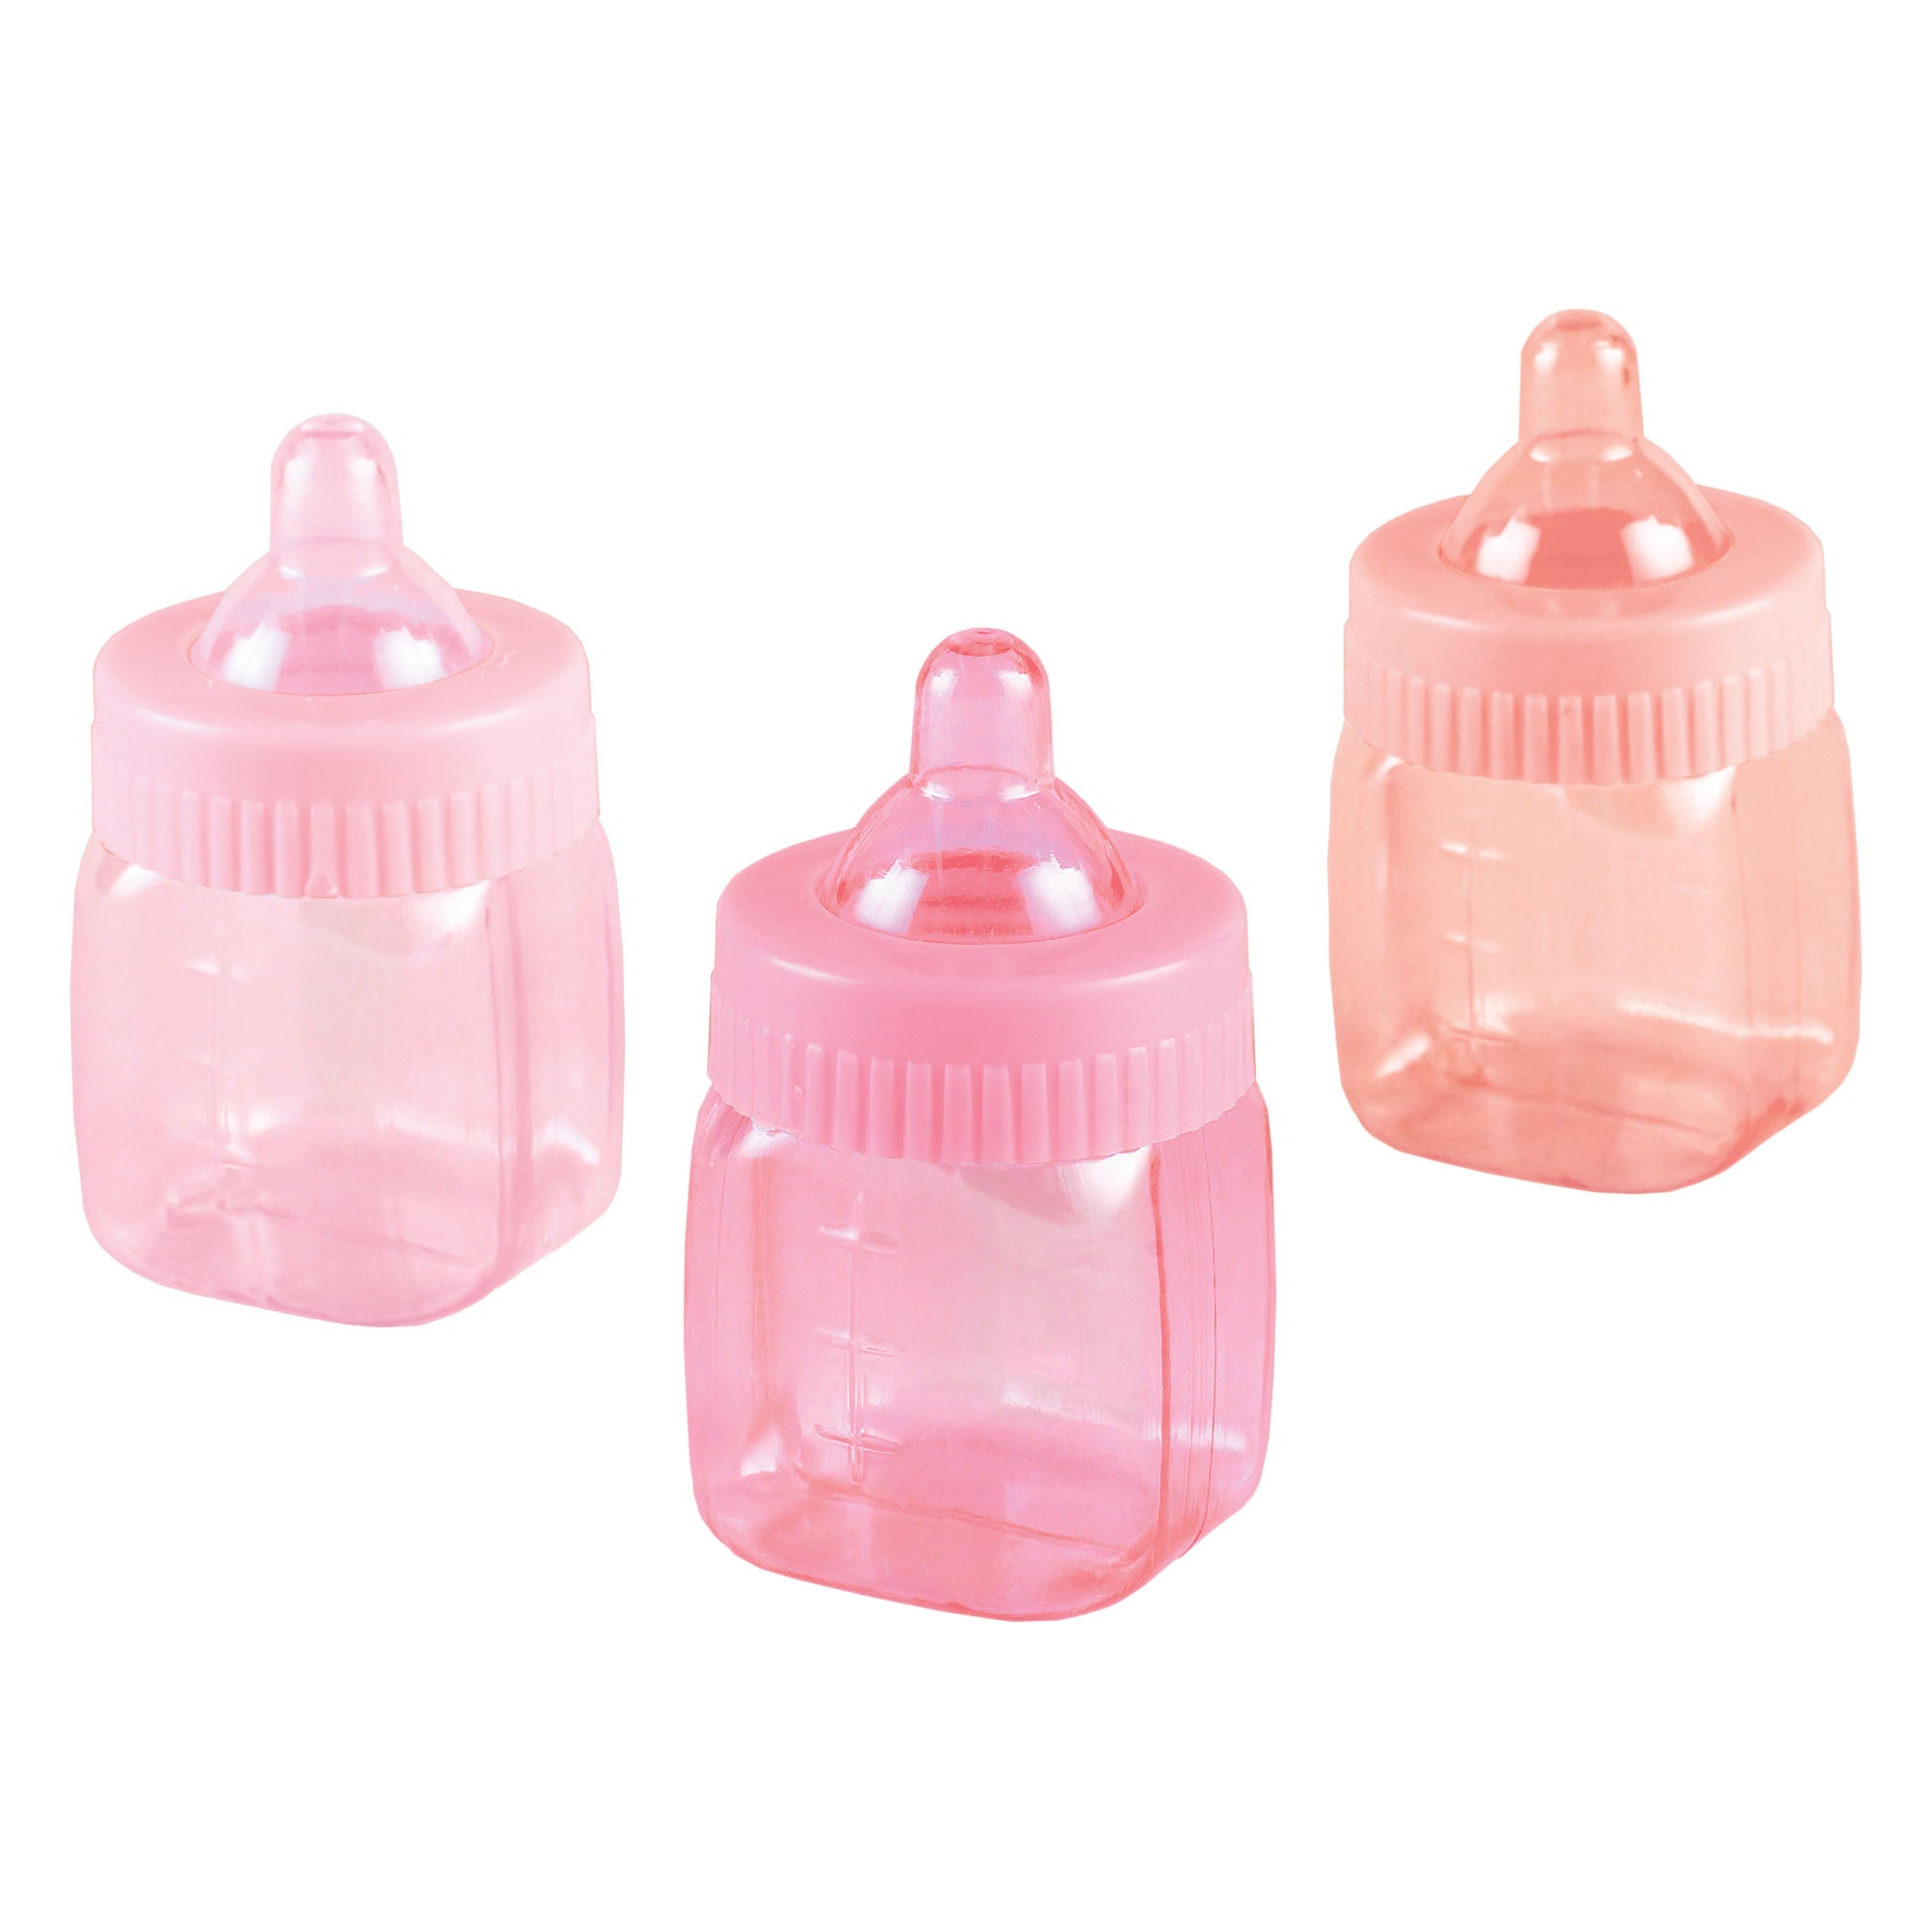 Pink Baby Shower Baby Bottle 1 1/2" x 3"  Favor Containers package of 6